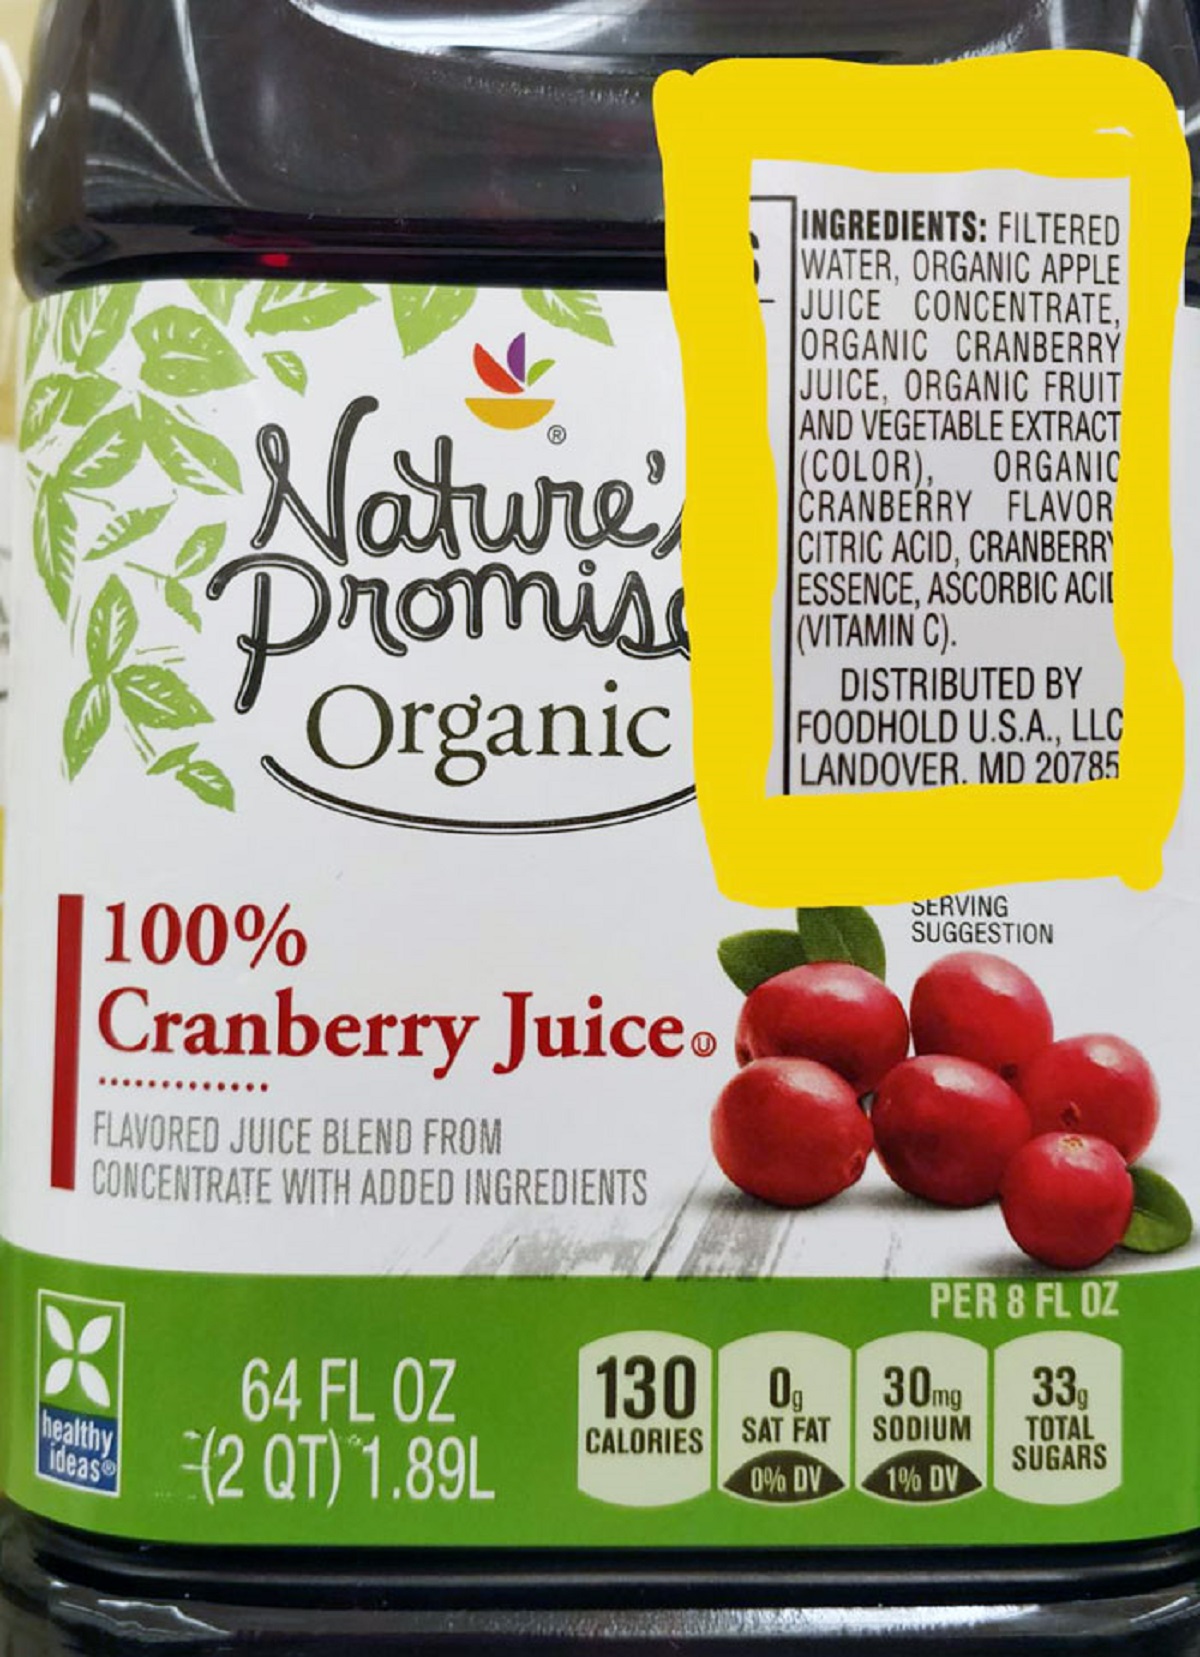 The Ingredients In This 100% Cranberry Juice